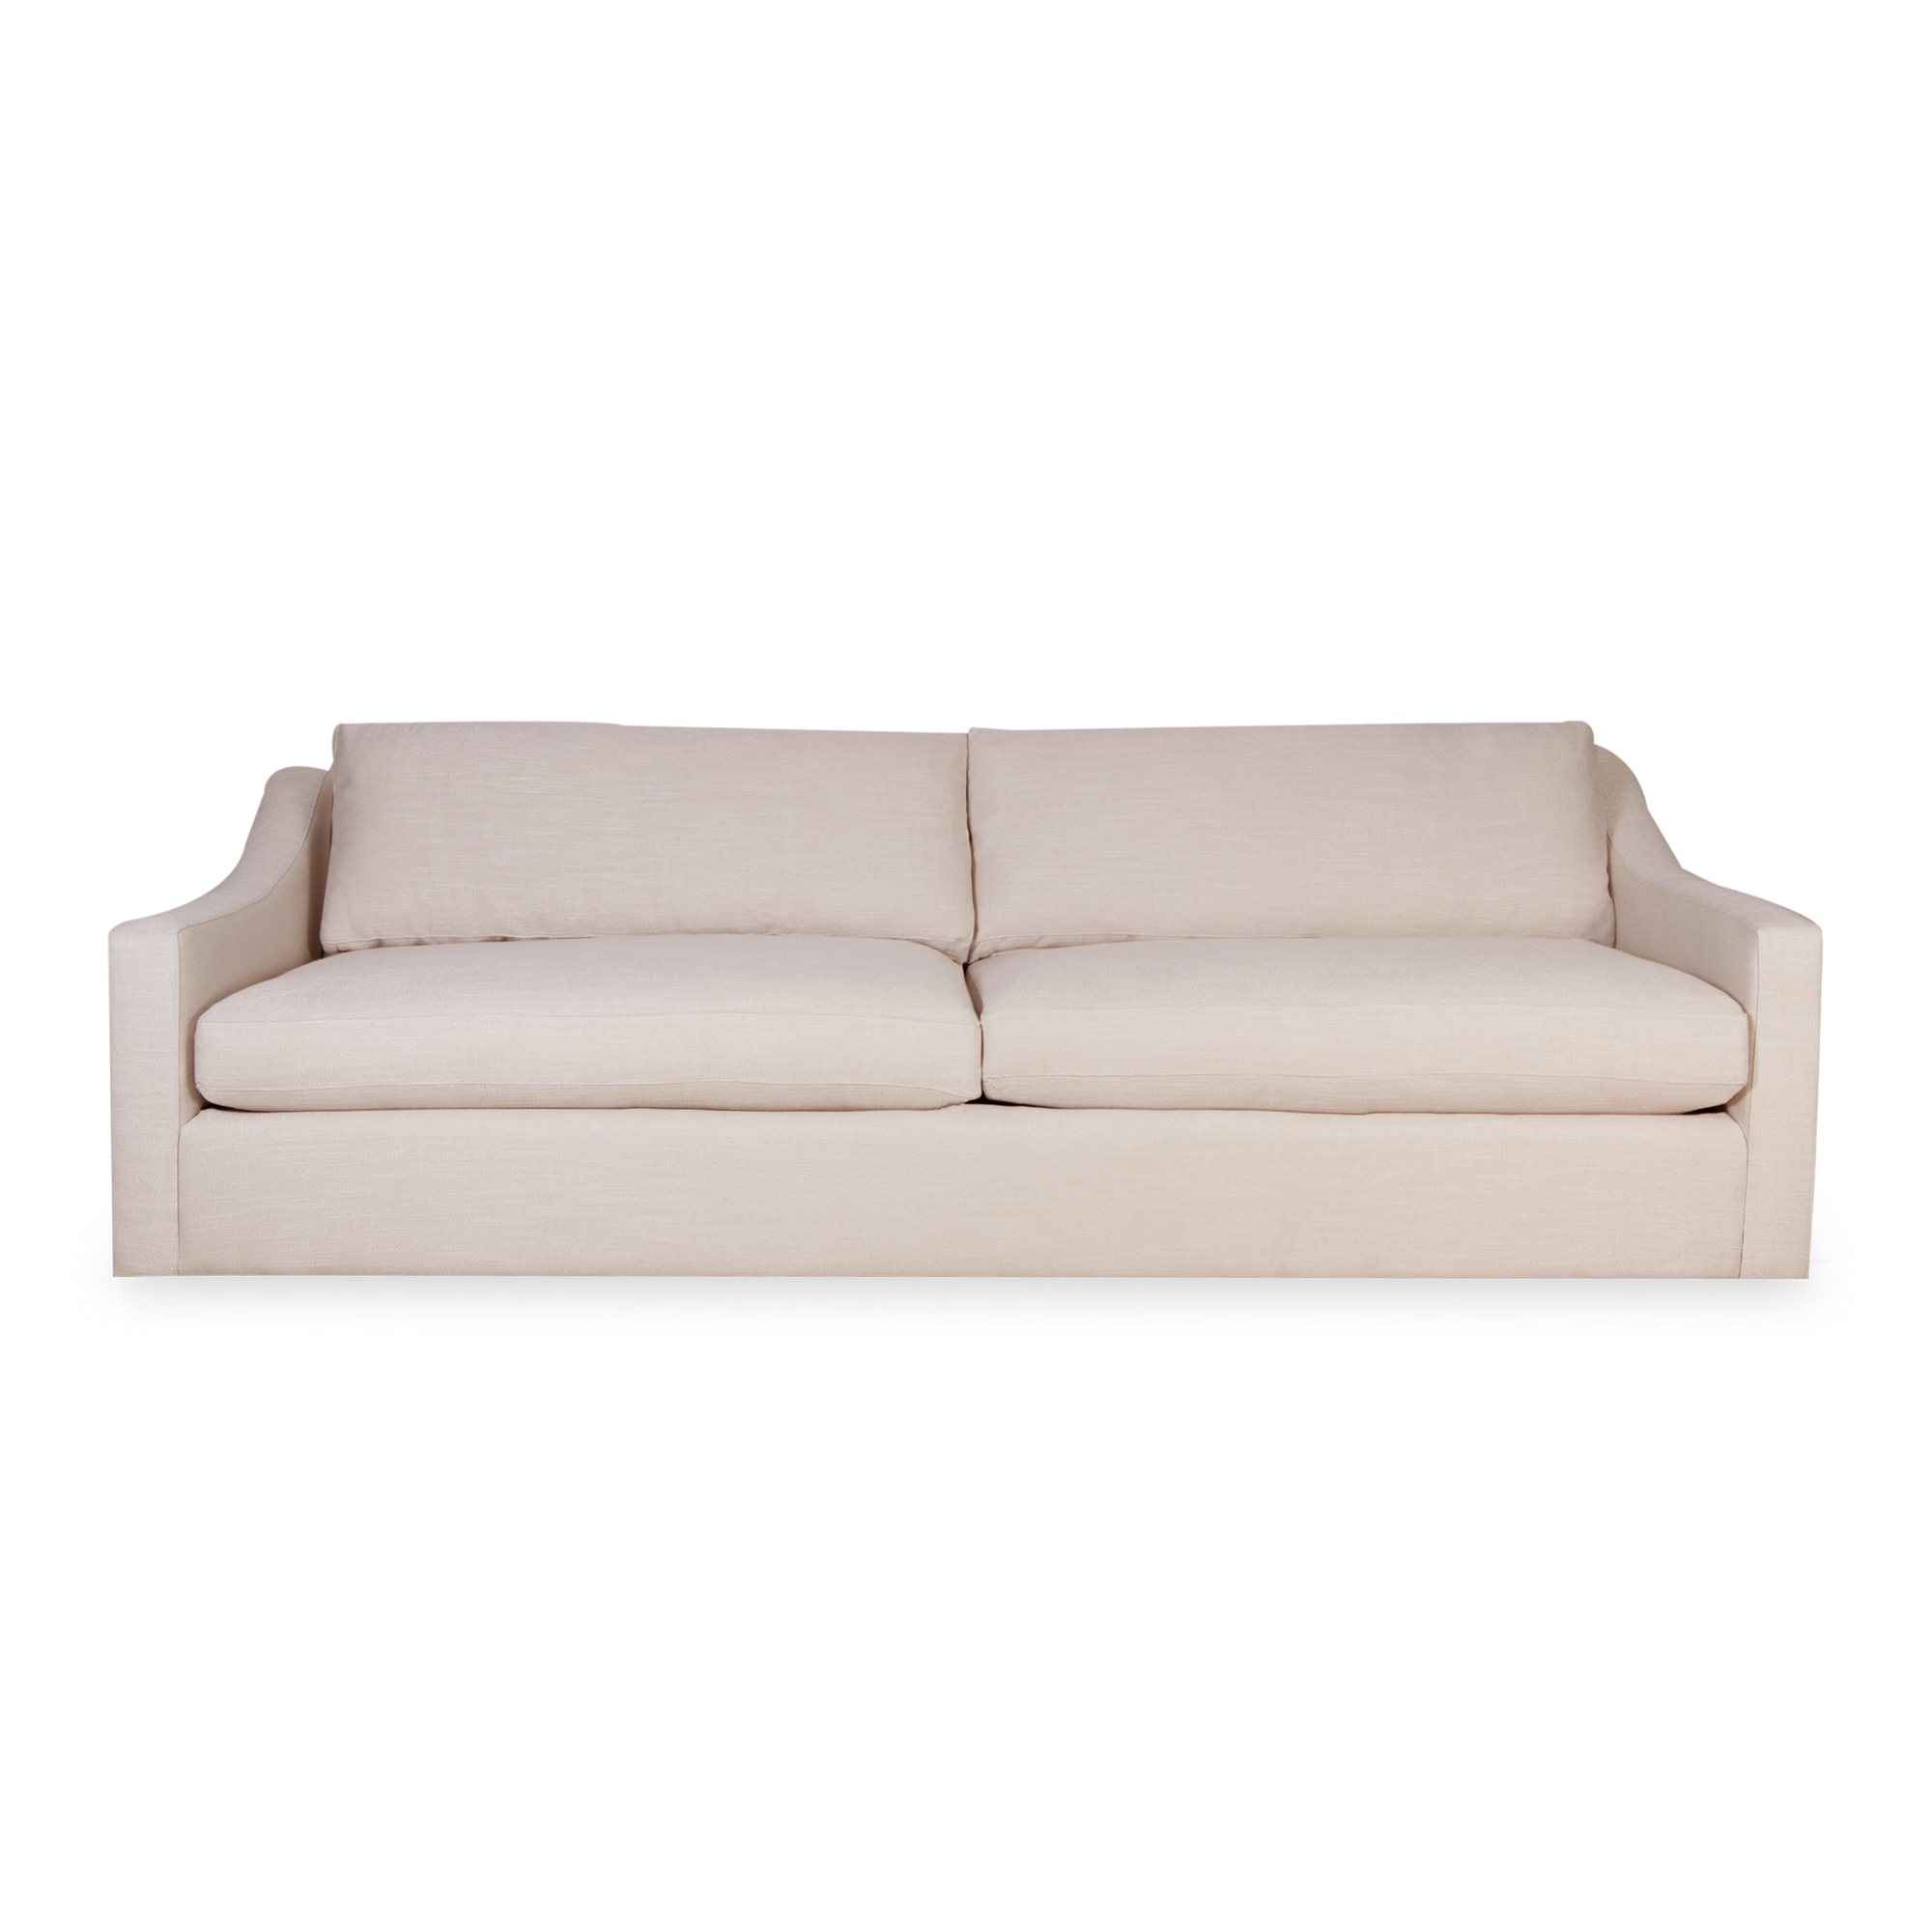 Traditional yet contemporary, the London Sofa is a perfect spot to relax on.